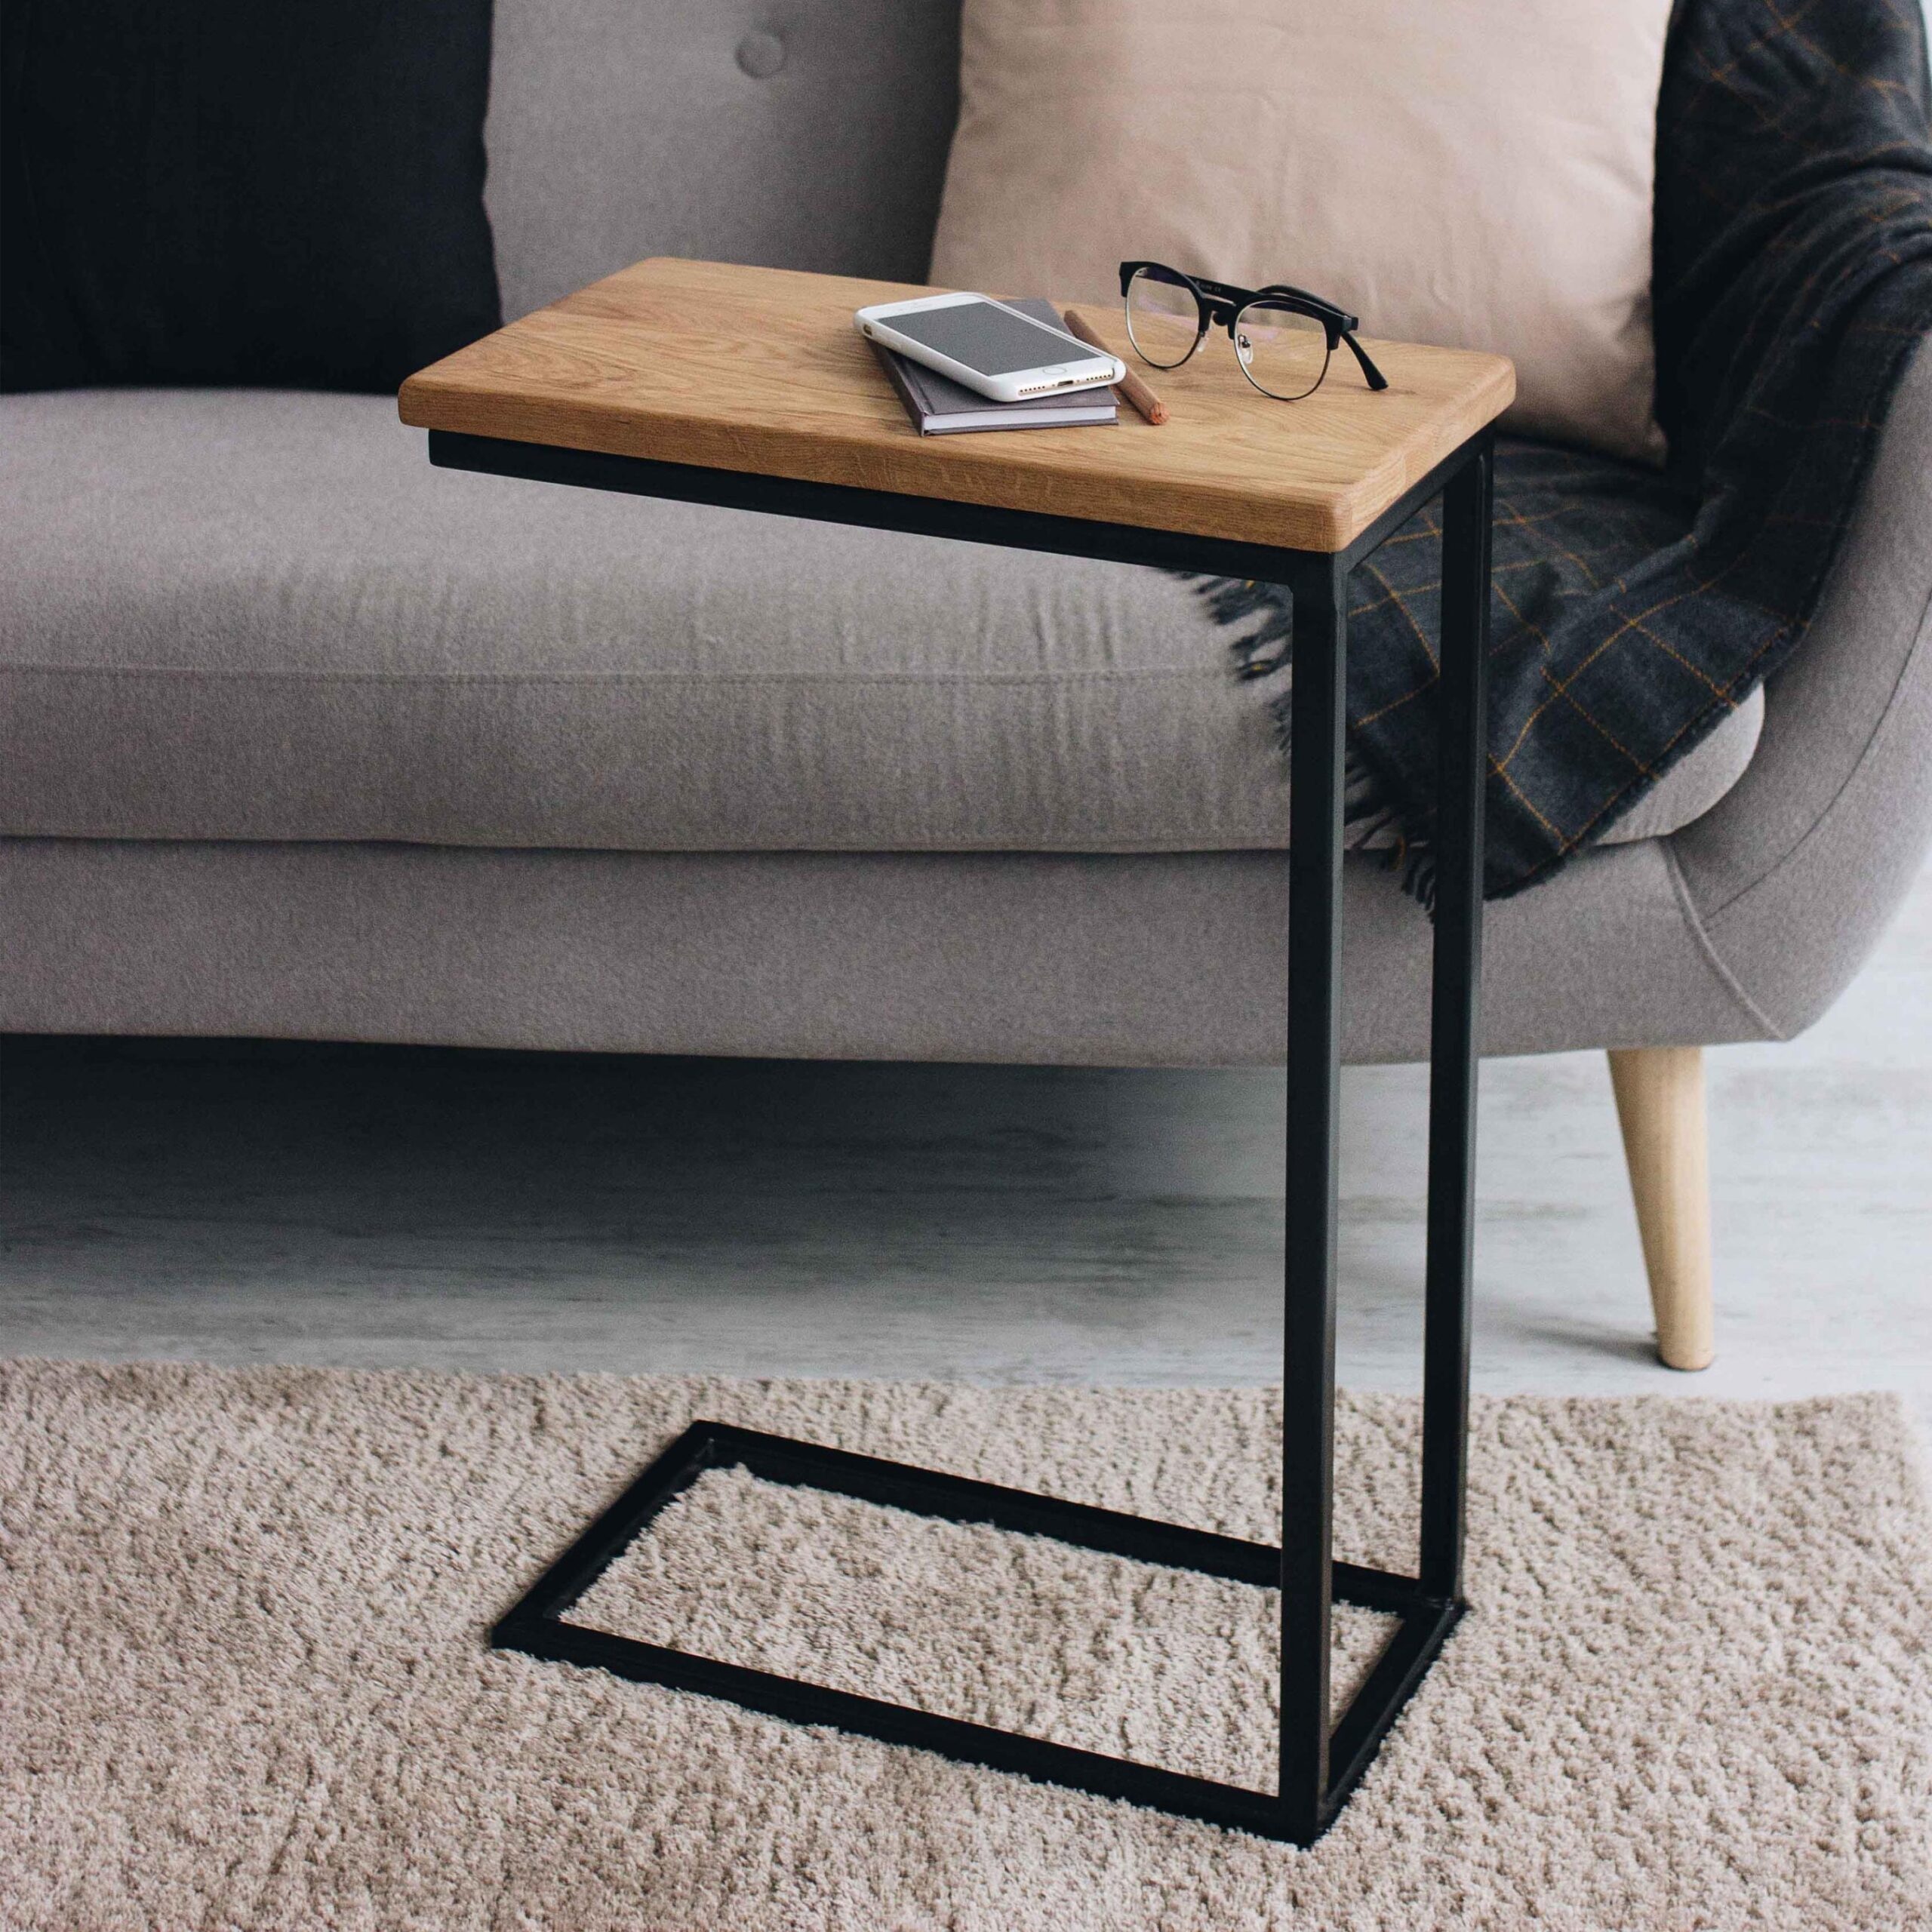 Bestloft® Side Tables San Jose Laptop Table Sofa Table Bed Table